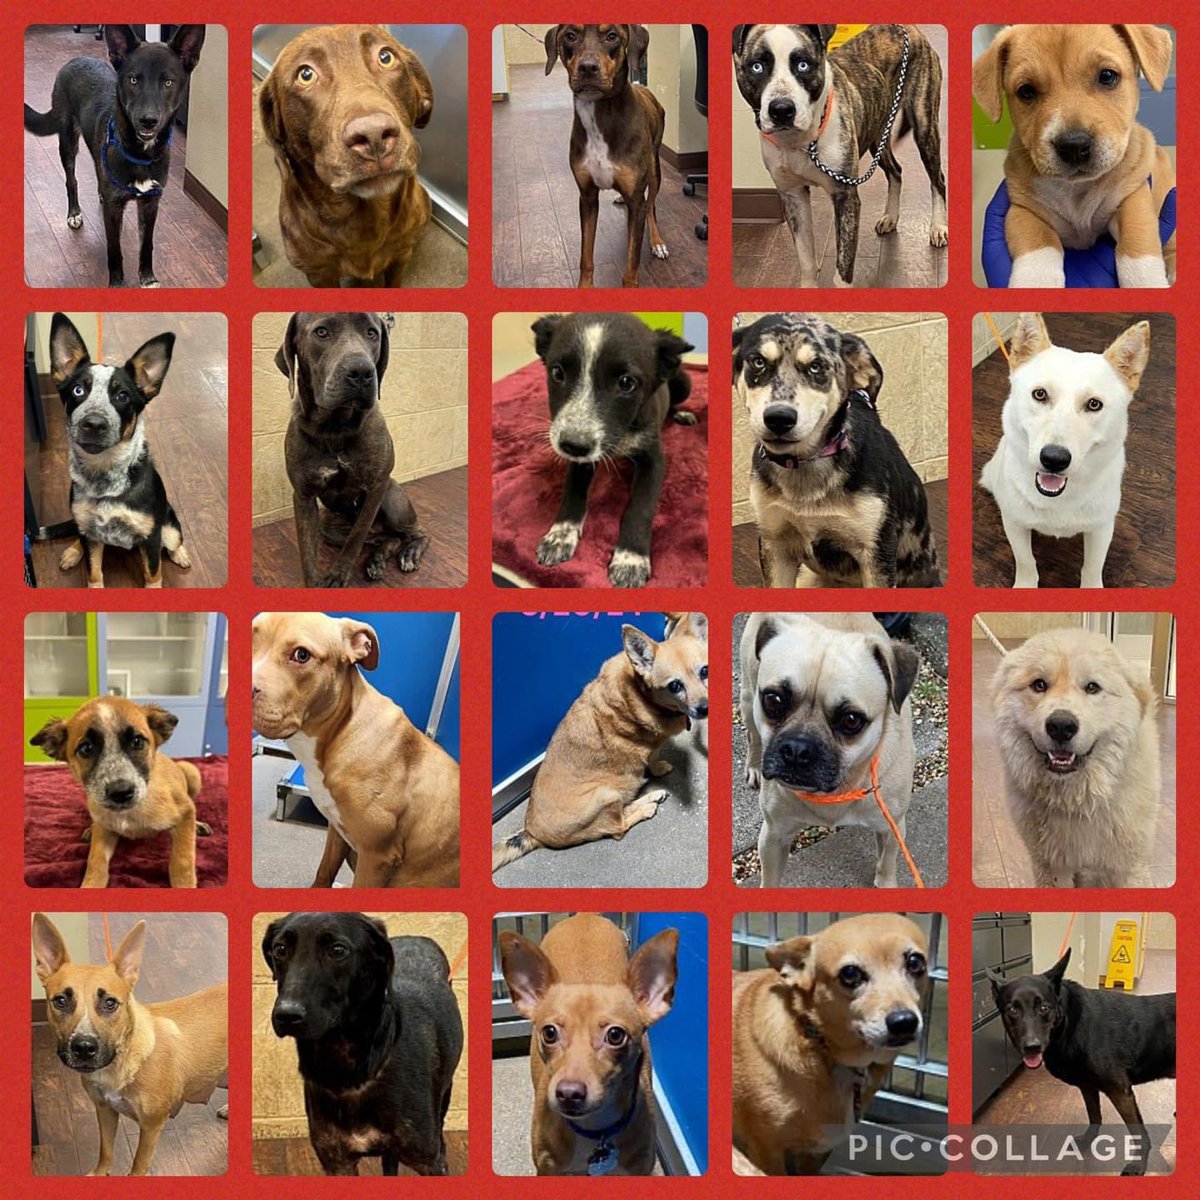 ‼️GREENVILLE ANIMAL SHELTER DOGS COMPLETELY FULL #Texas ‼️

Once full, dogs WILL be killed for space if kennels aren’t emptied

Consider Fostering a dog while rescues work to find these dogs GOOD homes
PLEASE go in or email animalcontrol@ci.greenville.tx.us
More⬇️ #dogsoftwitter